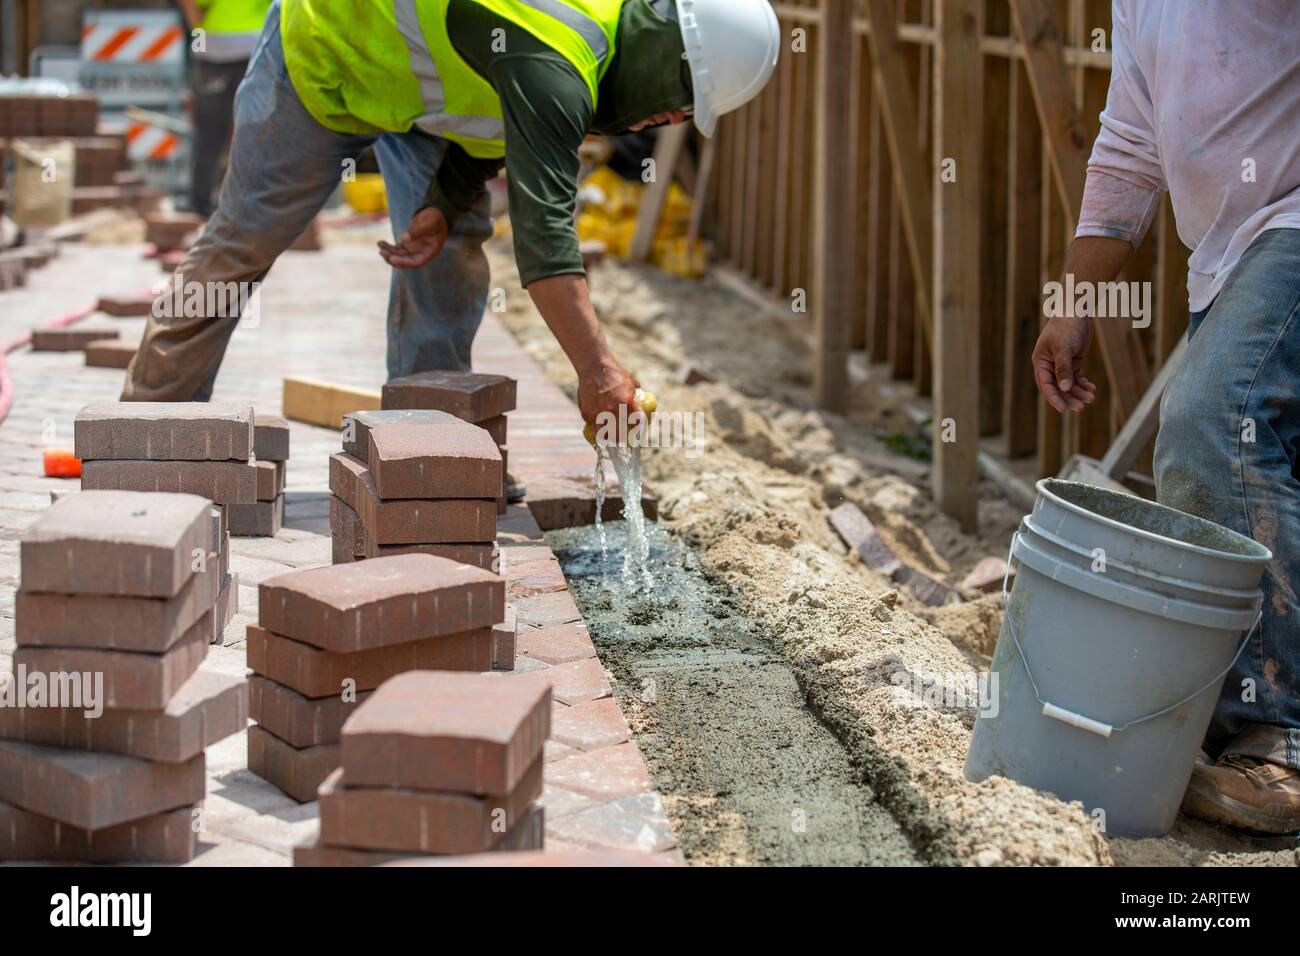 Brick layer or paver construction worker is watering some concrete to lay some paving bricks onto for optimized results. Stock Photo